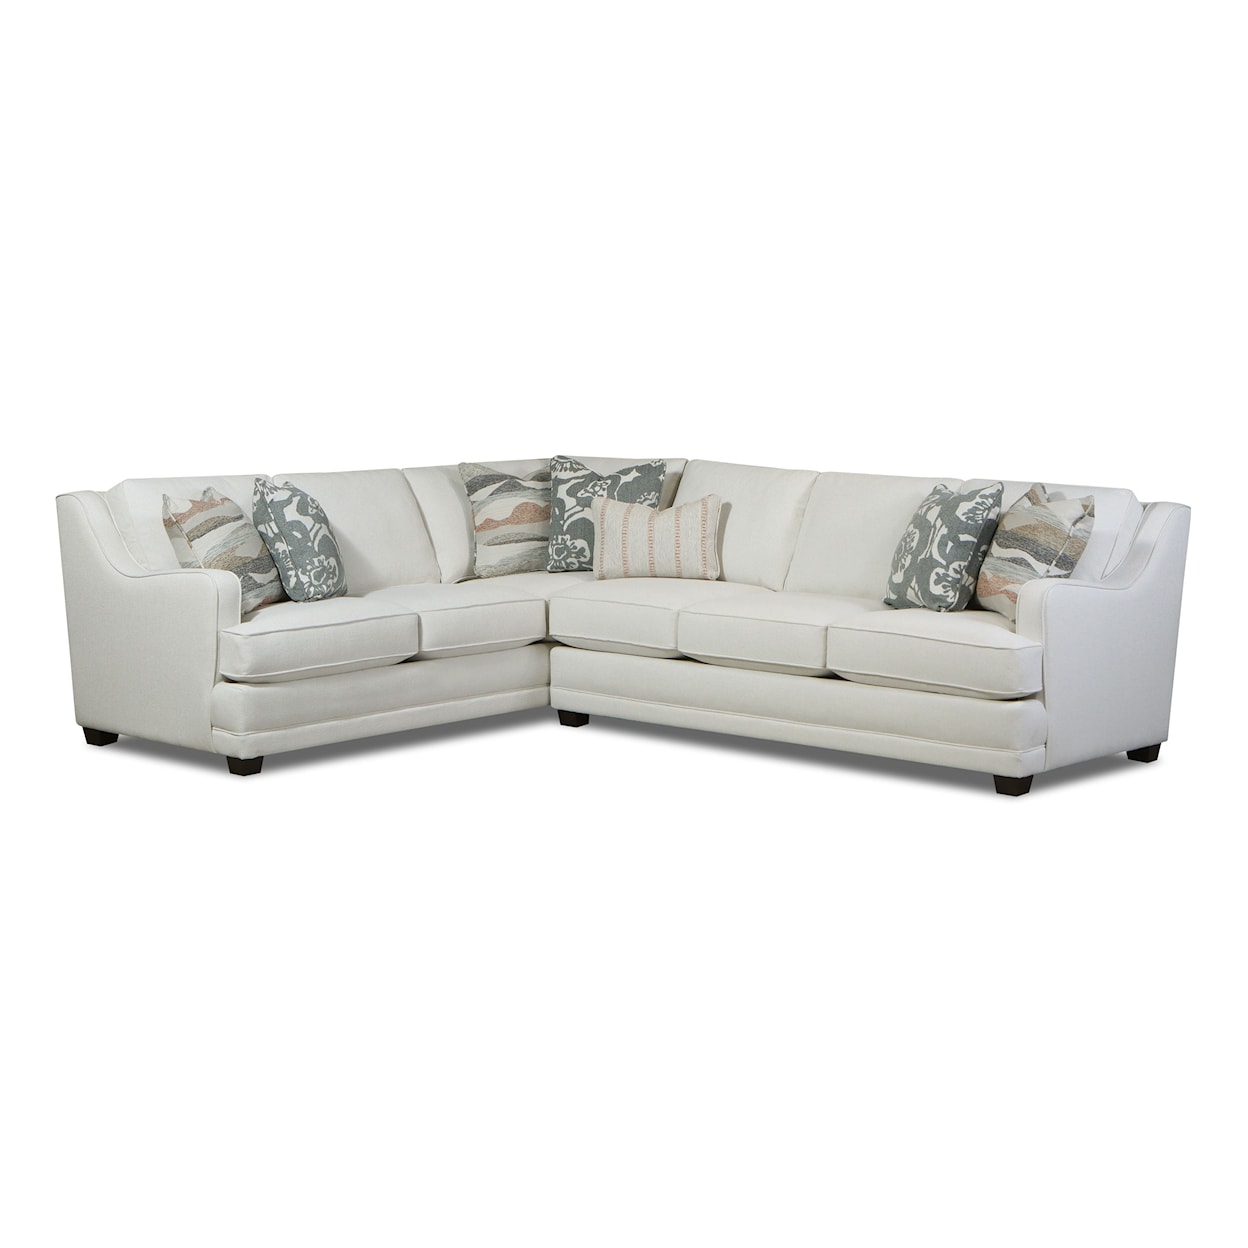 Fusion Furniture 7000 MISSIONARY SALT 2-Piece Sectional